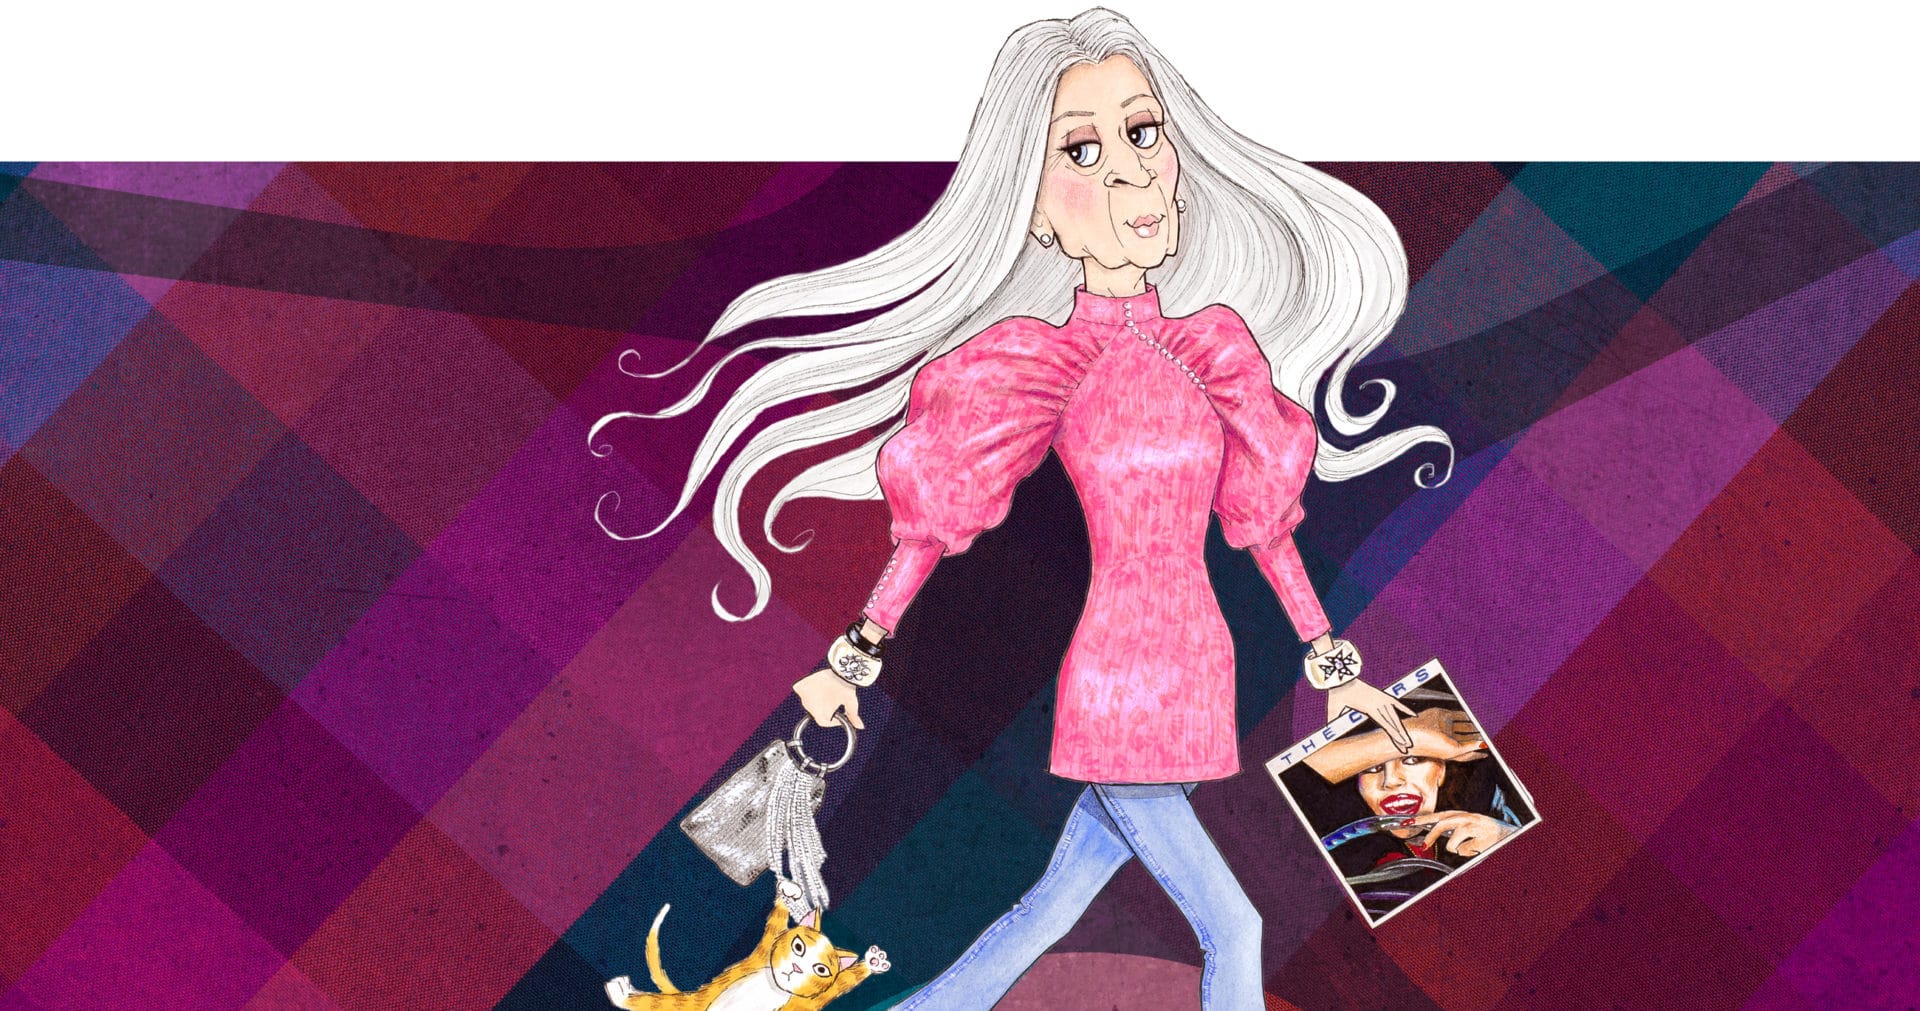 Fashion Illustration and blog post by Jill Anthony. Background by Brandon Smith. 